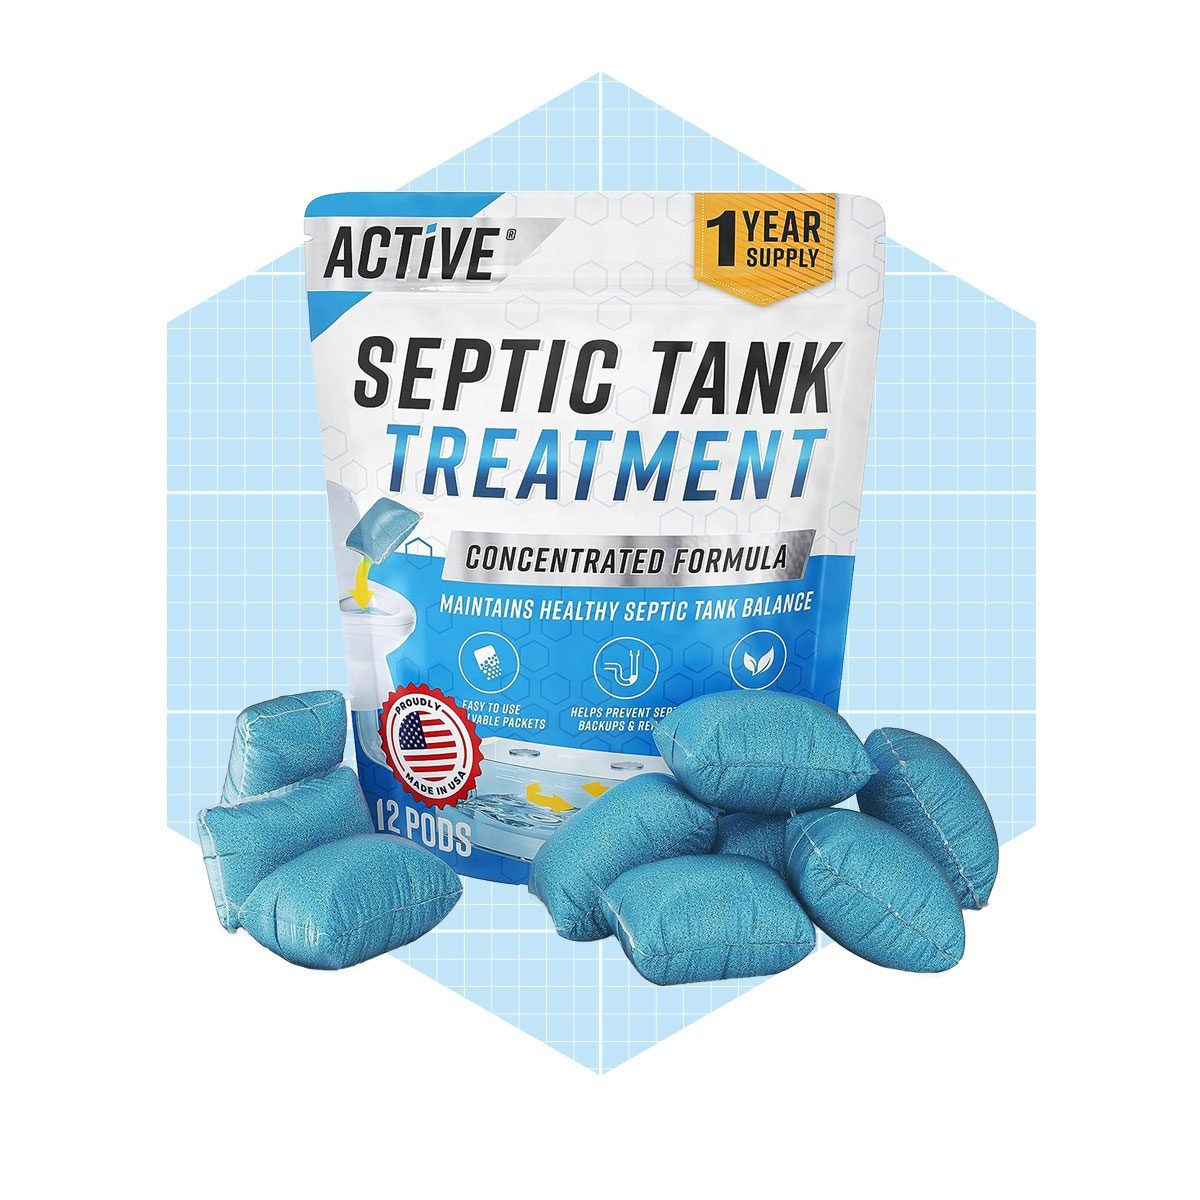 These New Septic Tank Treatment Pods Ensure Your System Runs In Tip Top Shape